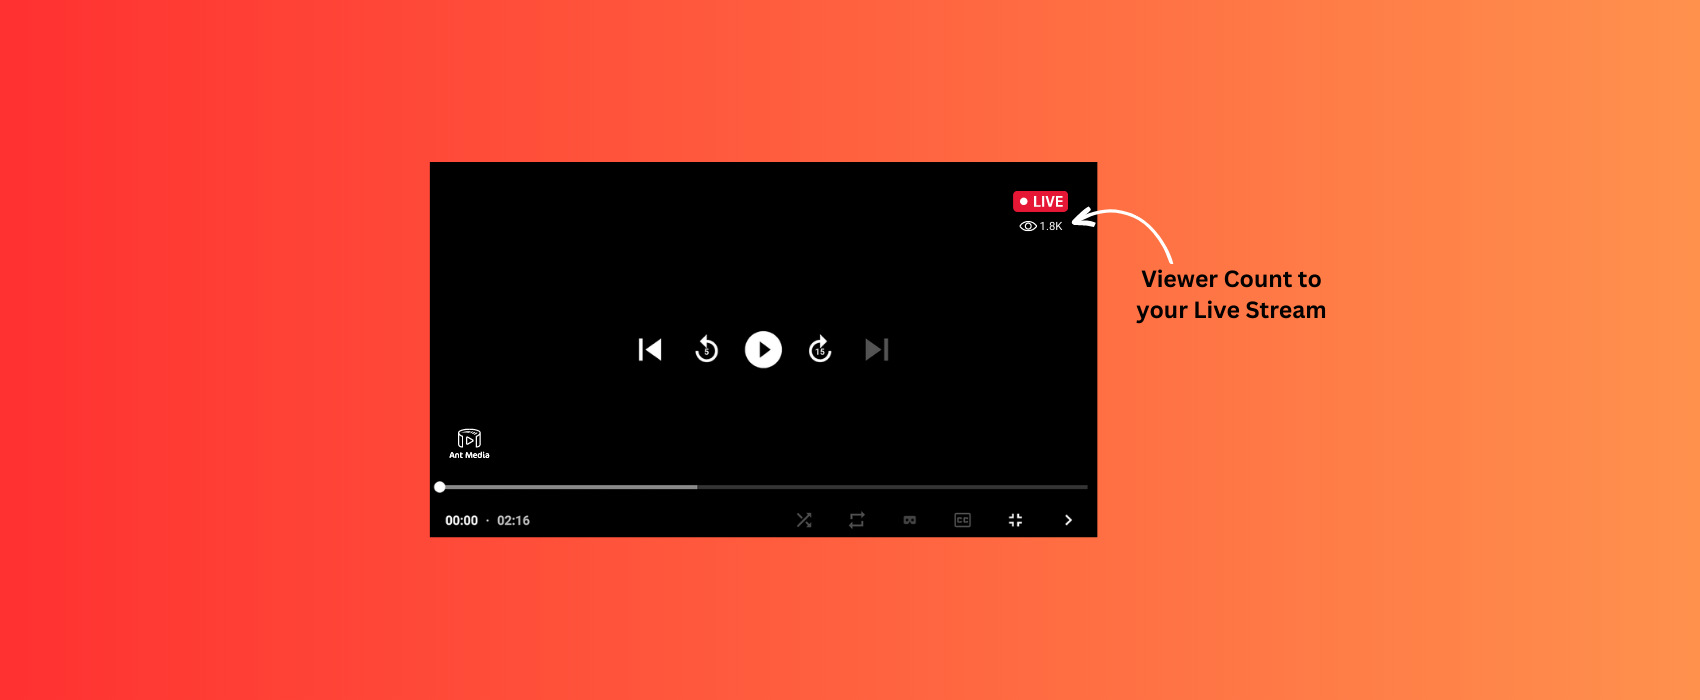 Add a Real-time Viewer Count to your Live Stream